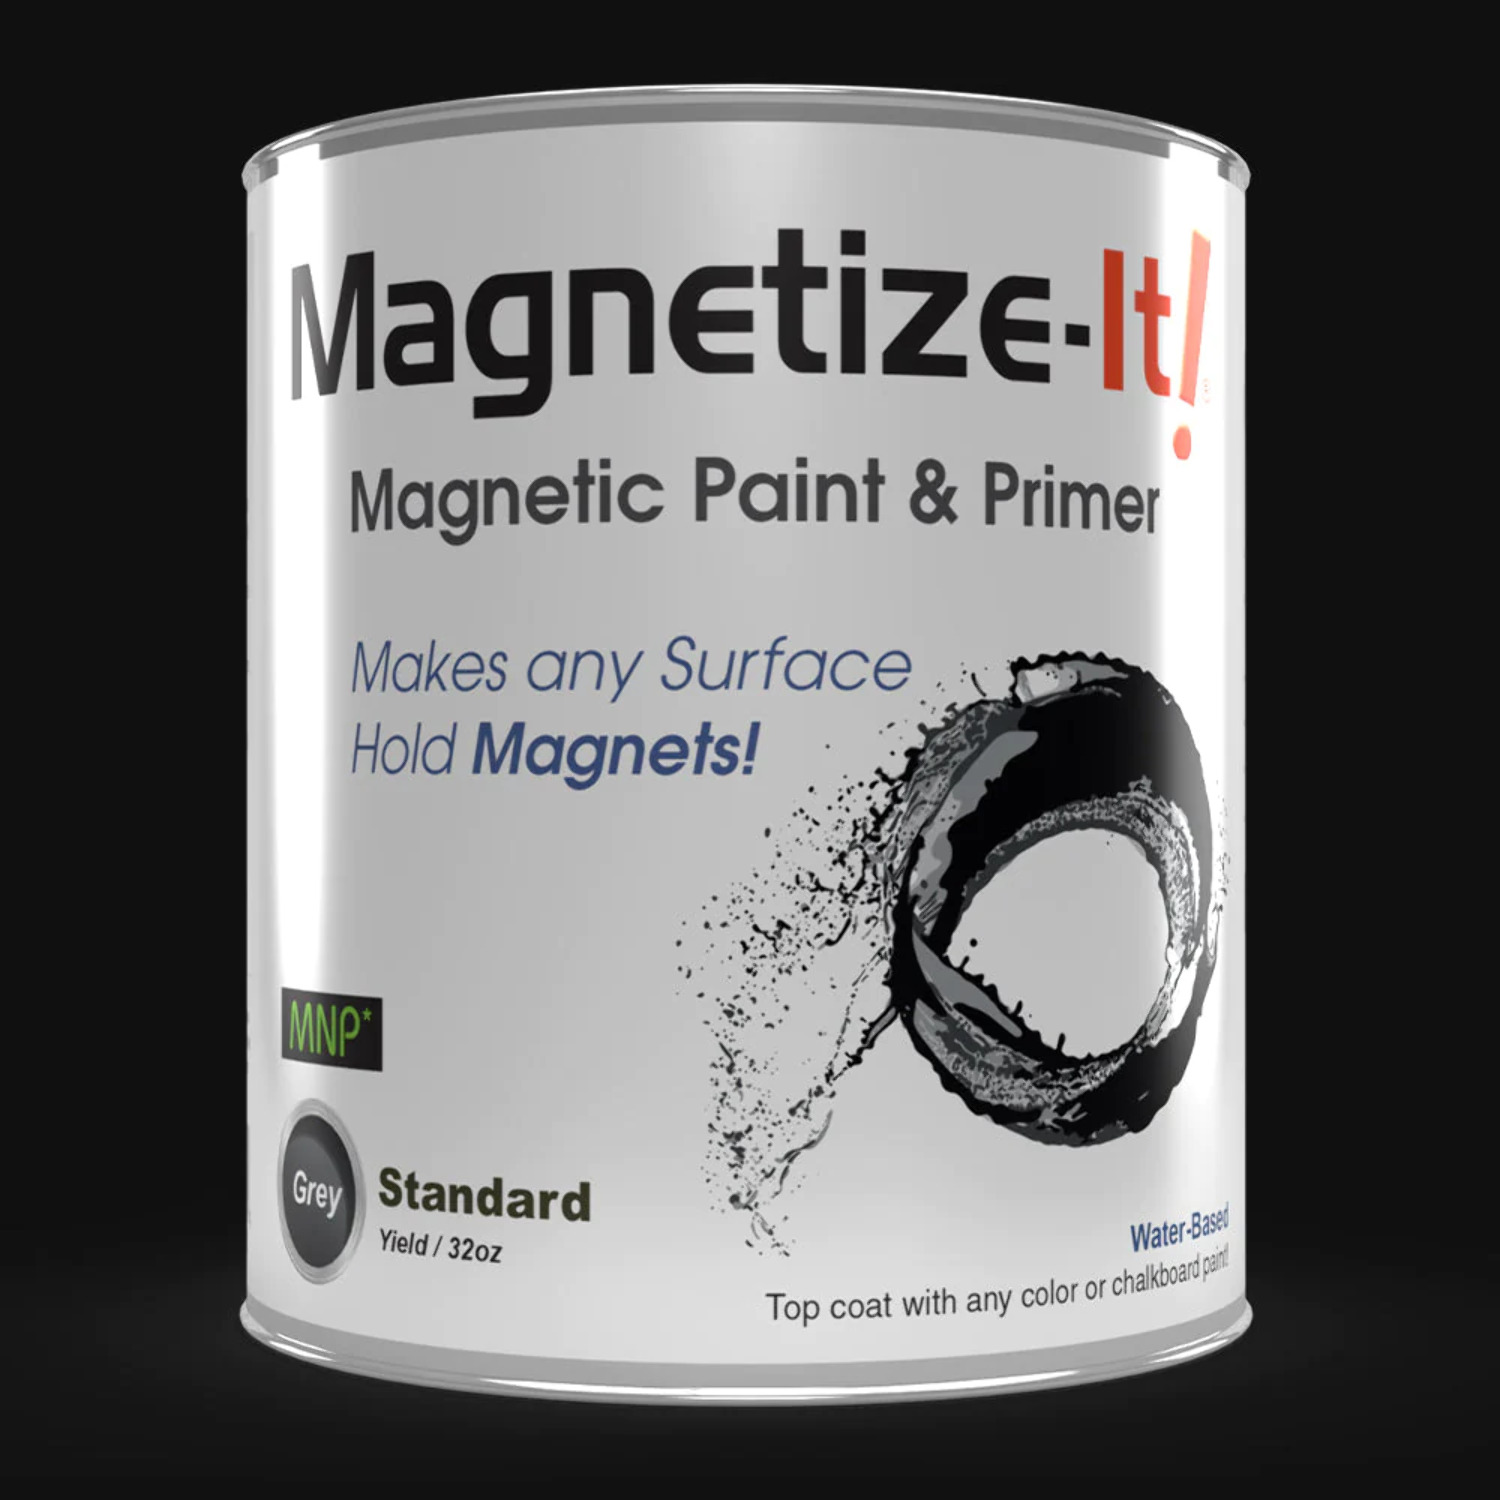 Magnetize-it! Magnetic Paint Primer (Water Based) Standard Yield Mistd-1530, Size: 32oz, Gray